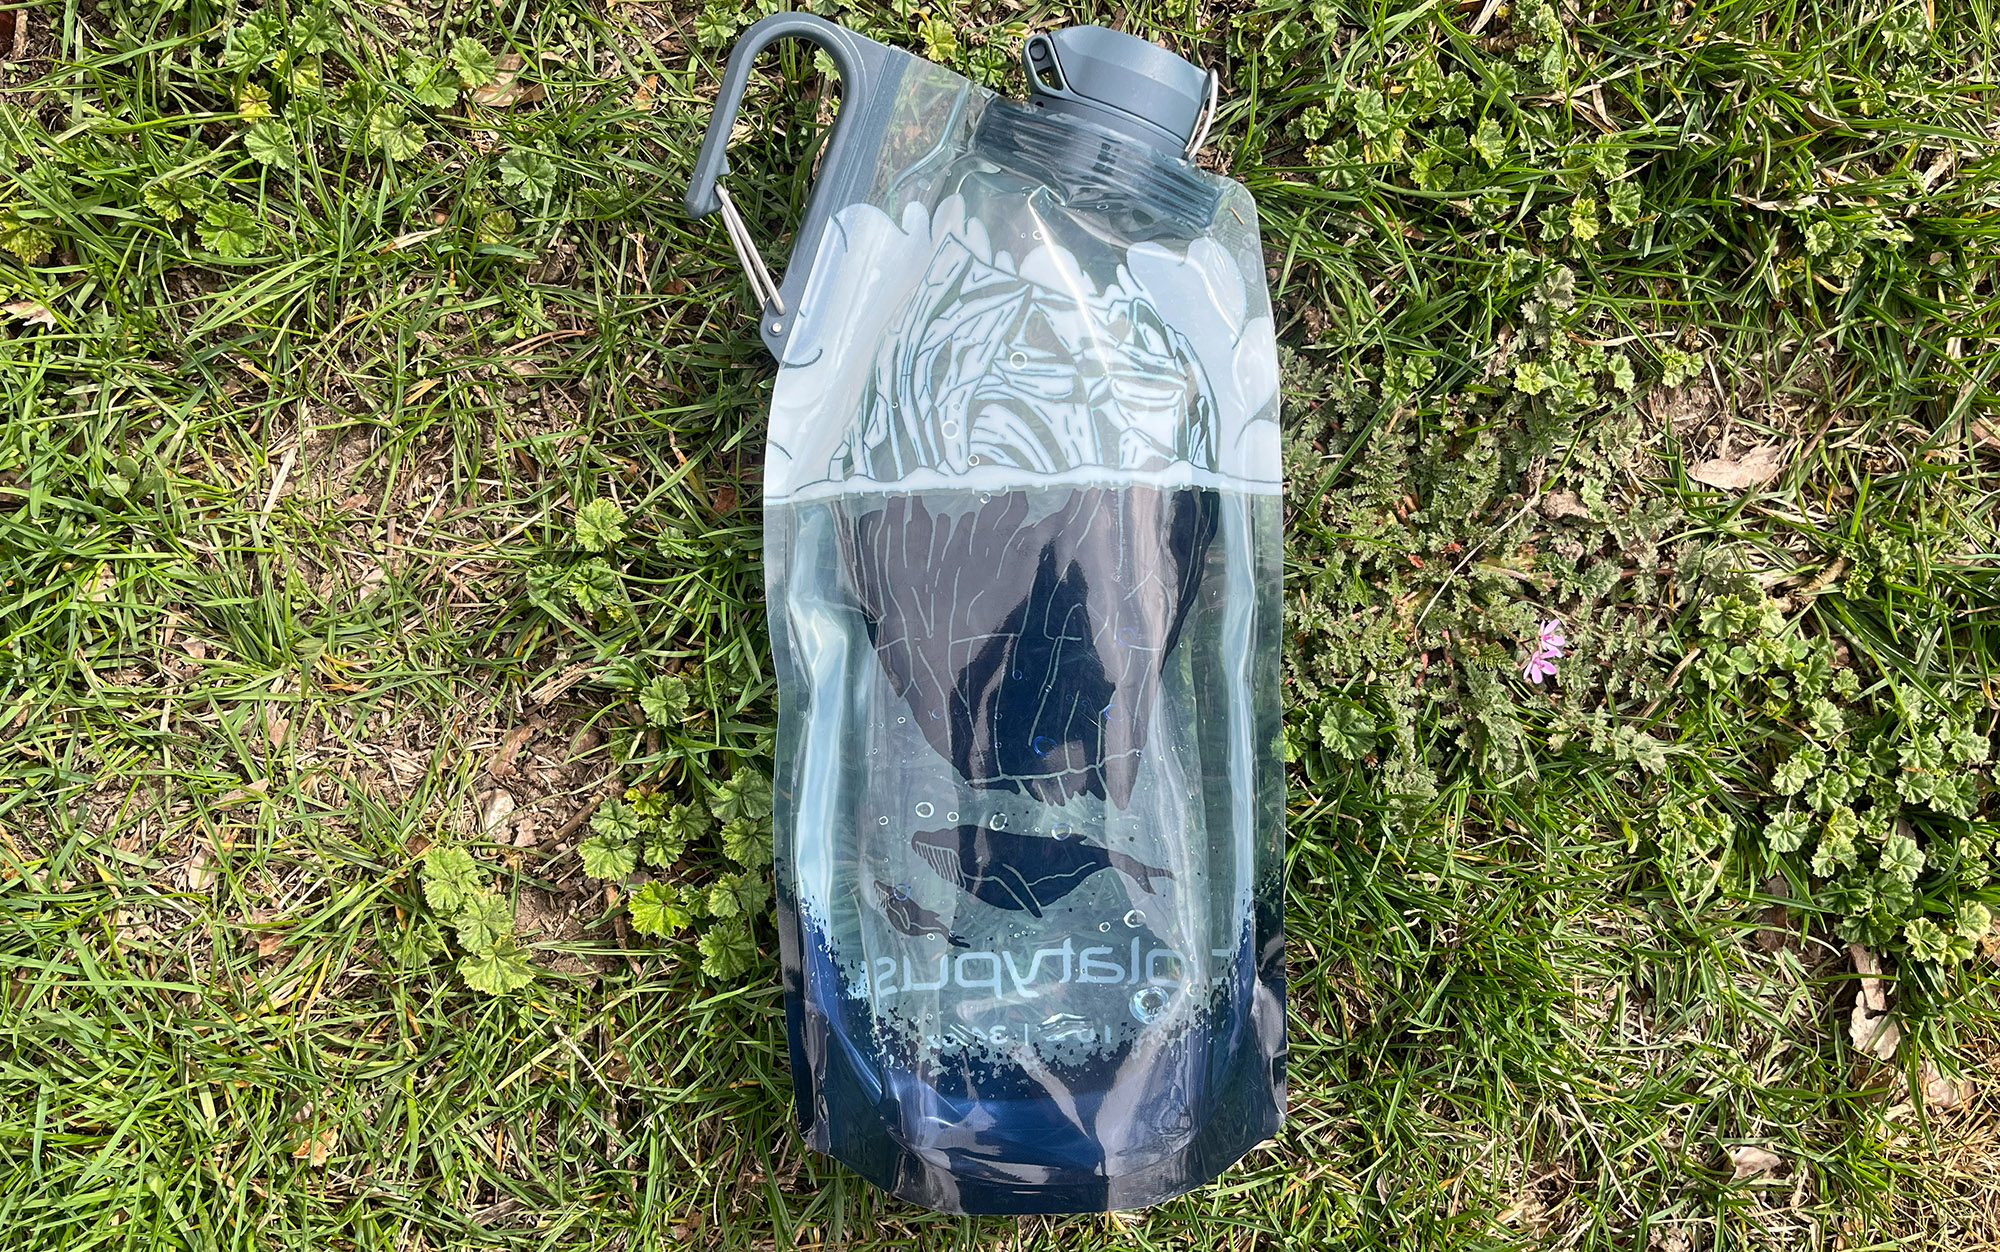 Best Water Bottles for Hiking of 2023